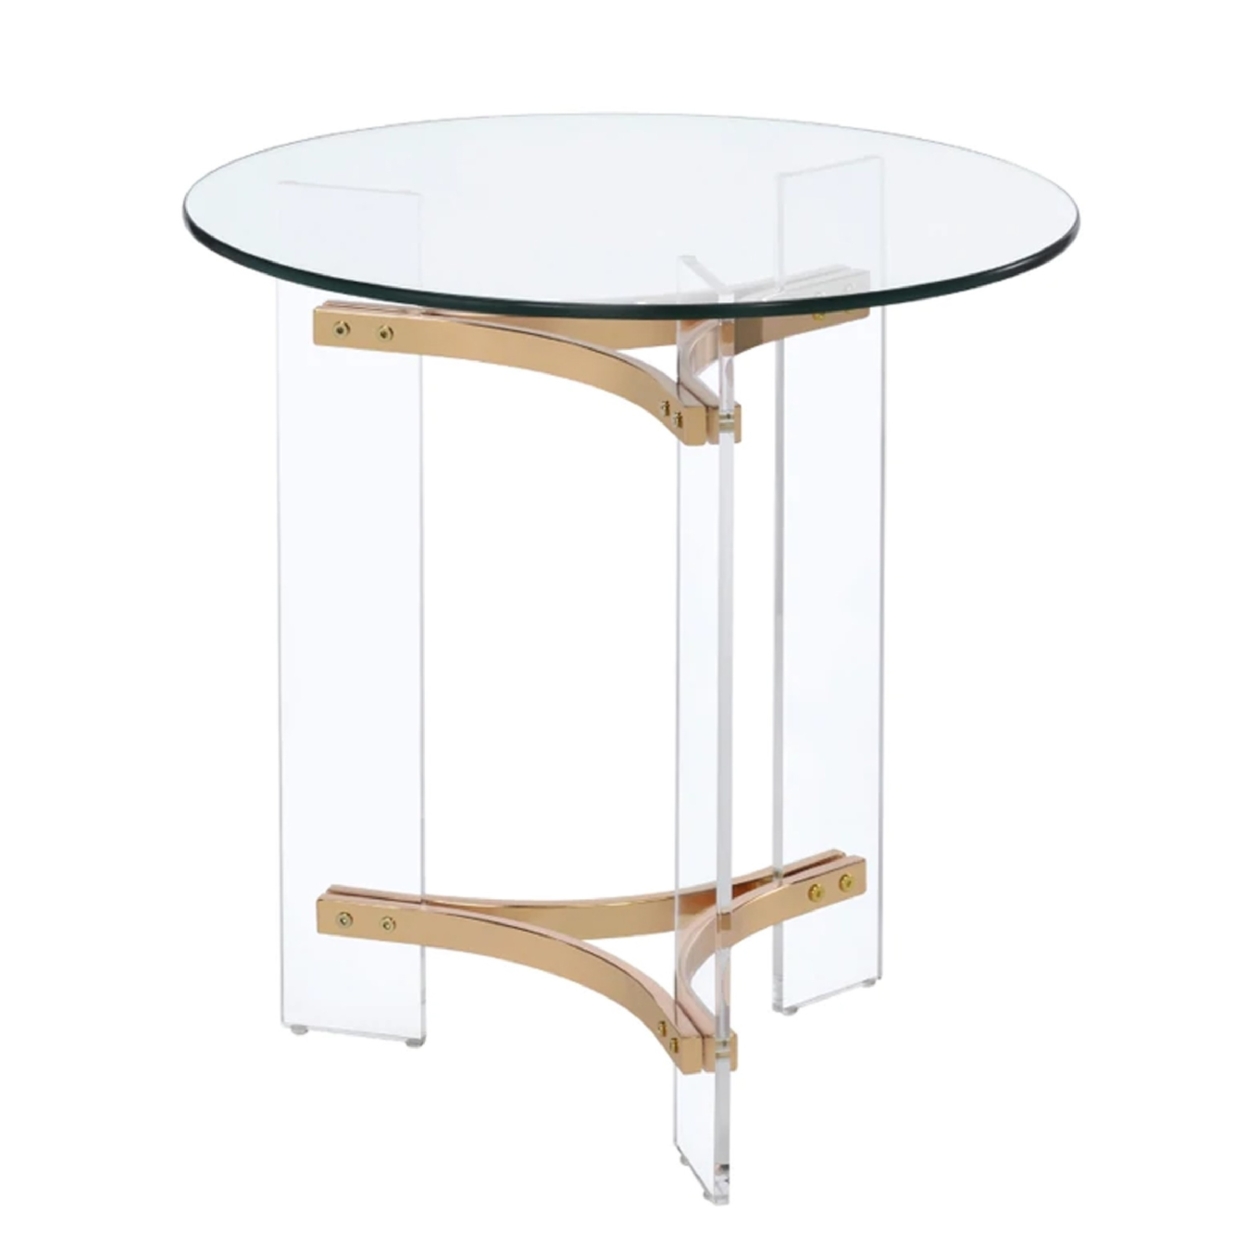 Hale 23 Inch Round End Table, Glass Top, Acrylic Legs, Clear, Gold- Saltoro Sherpi